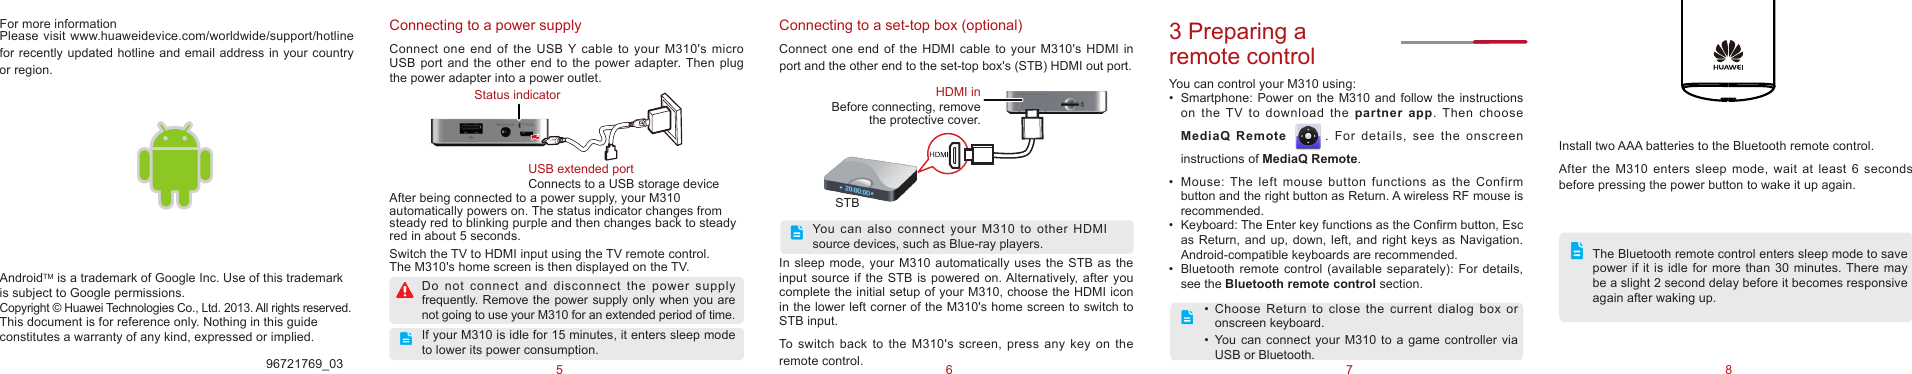 75 6 8In sleep mode, your M310 automatically uses the STB as the input source if the STB is powered on. Alternatively,  after you complete the initial setup of your M310, choose the HDMI icon in the lower left corner of the M310&apos;s home screen to switch to STB input. To  switch  back  to  the  M310&apos;s screen,  press  any  key  on the remote control. Connecting to a power supplyConnect one end  of  the USB Y cable to your M310&apos;s micro USB port and  the  other end to the power adapter. Then plug the power adapter into a power outlet.After being connected to a power supply, your M310 automatically powers on. The status indicator changes from steady red to blinking purple and then changes back to steady red in about 5 seconds. Switch the TV to HDMI input using the TV remote control.  The M310&apos;s home screen is then displayed on the TV. 96721769_033 Preparing a remote controlYou can control your M310 using:•  Smartphone:  Power  on  the  M310  and  follow the instructions on  the  TV  to  download  the  partner app. Then choose MediaQ Remote         . For details, see the  onscreen instructions of MediaQ Remote. •  Mouse:  The  left  mouse  button  functions  as  the  Confirm button and the right button as Return. A wireless RF mouse is recommended. •  Keyboard: The Enter key functions as the Conrm button, Esc as Return, and up, down, left, and right keys as Navigation. Android-compatible keyboards are recommended.•  Bluetooth  remote control (available separately): For details, see the Bluetooth remote control section. •  Choose  Return  to  close  the  current  dialog  box  or onscreen keyboard. •  You  can  connect  your  M310  to  a  game  controller  via USB or Bluetooth.AndroidTM is a trademark of Google Inc. Use of this trademark is subject to Google permissions.Copyright © Huawei Technologies Co., Ltd. 2013. All rights reserved.This document is for reference only. Nothing in this guide constitutes a warranty of any kind, expressed or implied.Do  not  connect  and  disconnect  the  power  supply frequently.  Remove the power supply only  when you are not going to use your M310 for an extended period of time.If your M310 is idle for 15 minutes, it enters sleep mode to lower its power consumption.USB extended portConnects to a USB storage deviceStatus indicatorConnecting to a set-top box (optional)Connect one end  of  the HDMI cable to your M310&apos;s  HDMI  in port and the other end to the set-top box&apos;s (STB) HDMI out port.You  can  also  connect  your  M310  to  other  HDMI source devices, such as Blue-ray players.STBHDMI inBefore connecting, remove the protective cover. For more informationPlease visit www.huaweidevice.com/worldwide/support/hotline for recently updated hotline and email address in your country or region.OKInstall two AAA batteries to the Bluetooth remote control.After  the  M310 enters  sleep mode,  wait  at  least  6  seconds before pressing the power button to wake it up again.The Bluetooth remote control enters sleep mode to save power if it is idle for more than 30 minutes. There  may be a slight 2 second delay before it becomes responsive again after waking up.